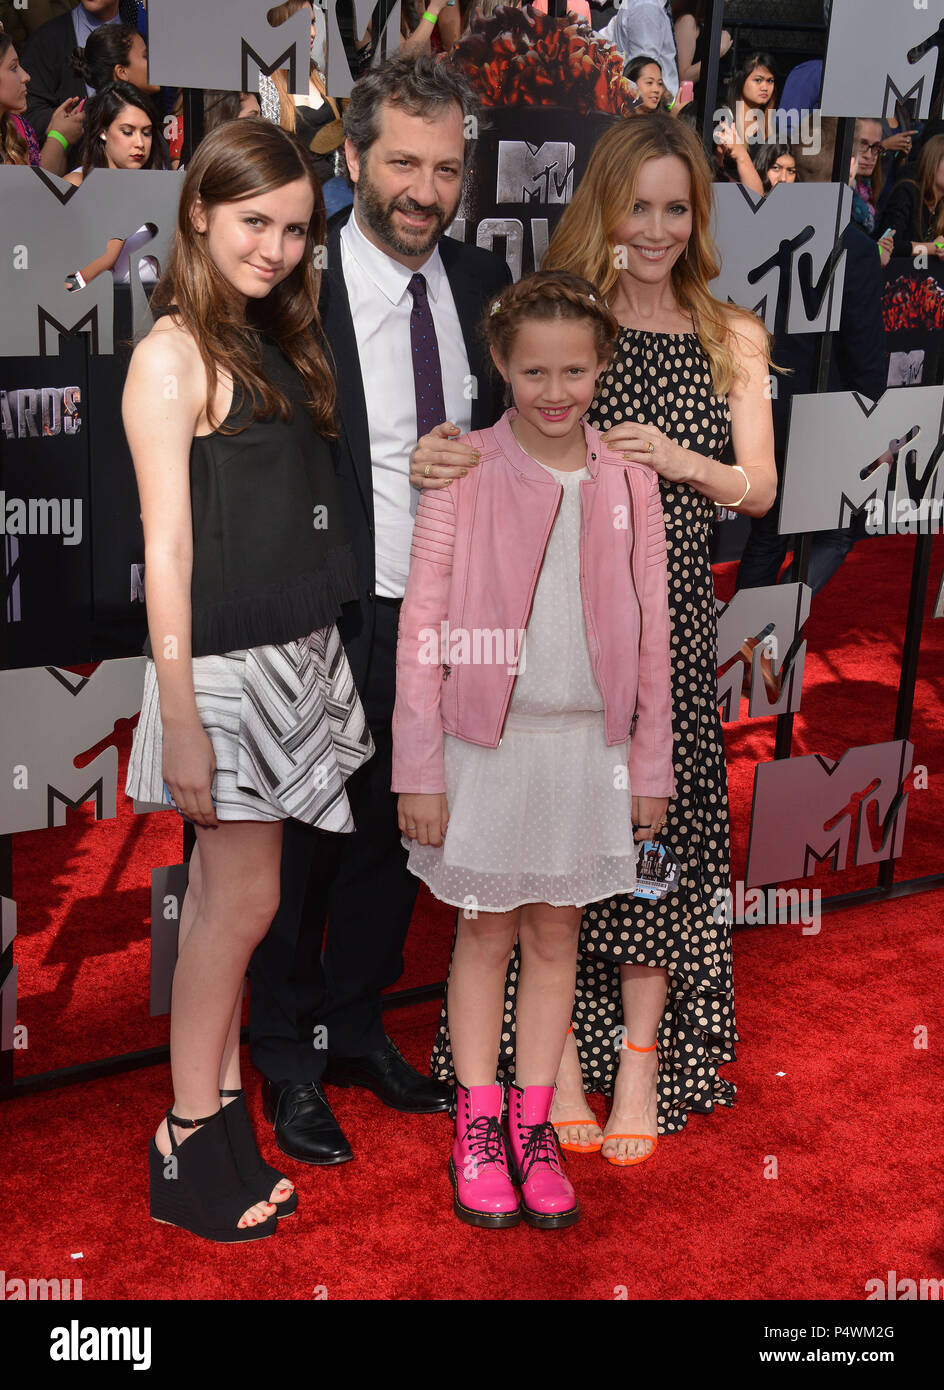 Leslie Mann, director Judd Apatow, and daughters Maude Apatow and Iris  Apatow at the 2014 MTV Movie Awards at the Nokia Theatre in Los  Angeles.Leslie Mann, director Judd Apatow, and daughters Maude